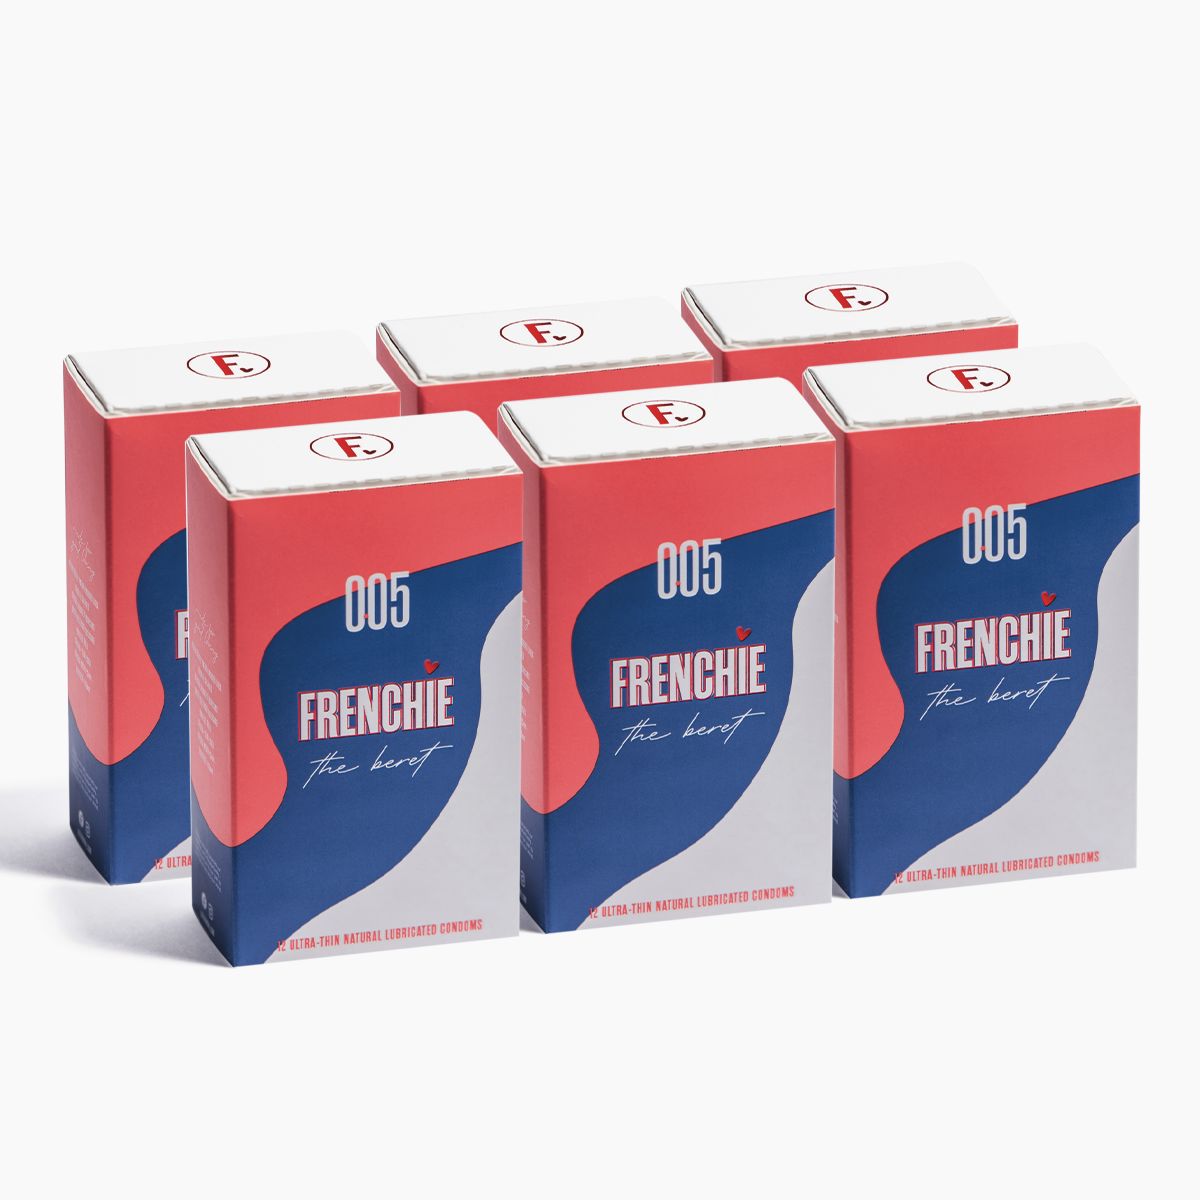 Frenchie the beret condom 0.05 x 72